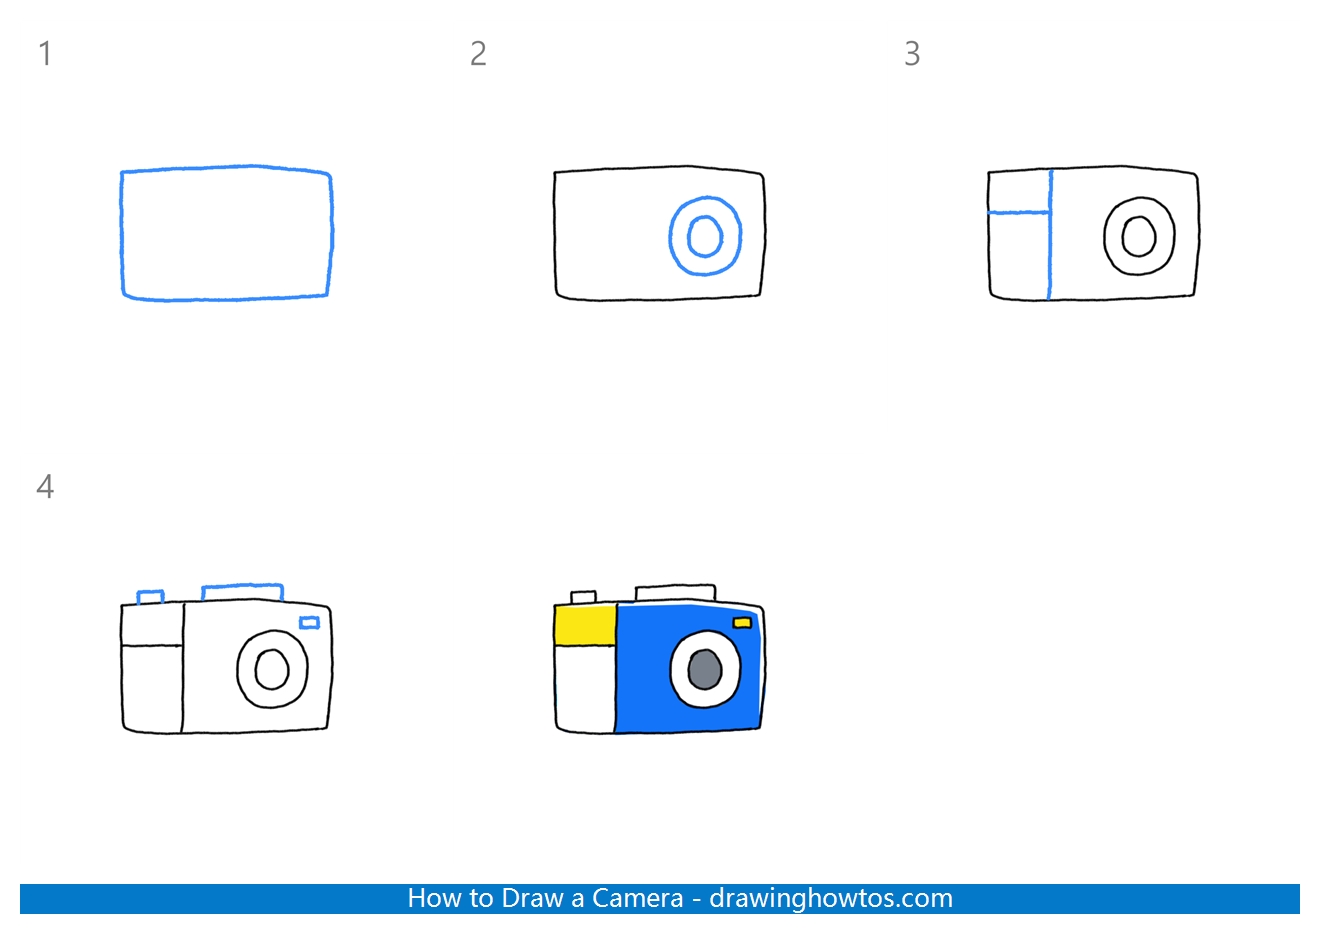 How to Draw a Digital Camera Step by Step